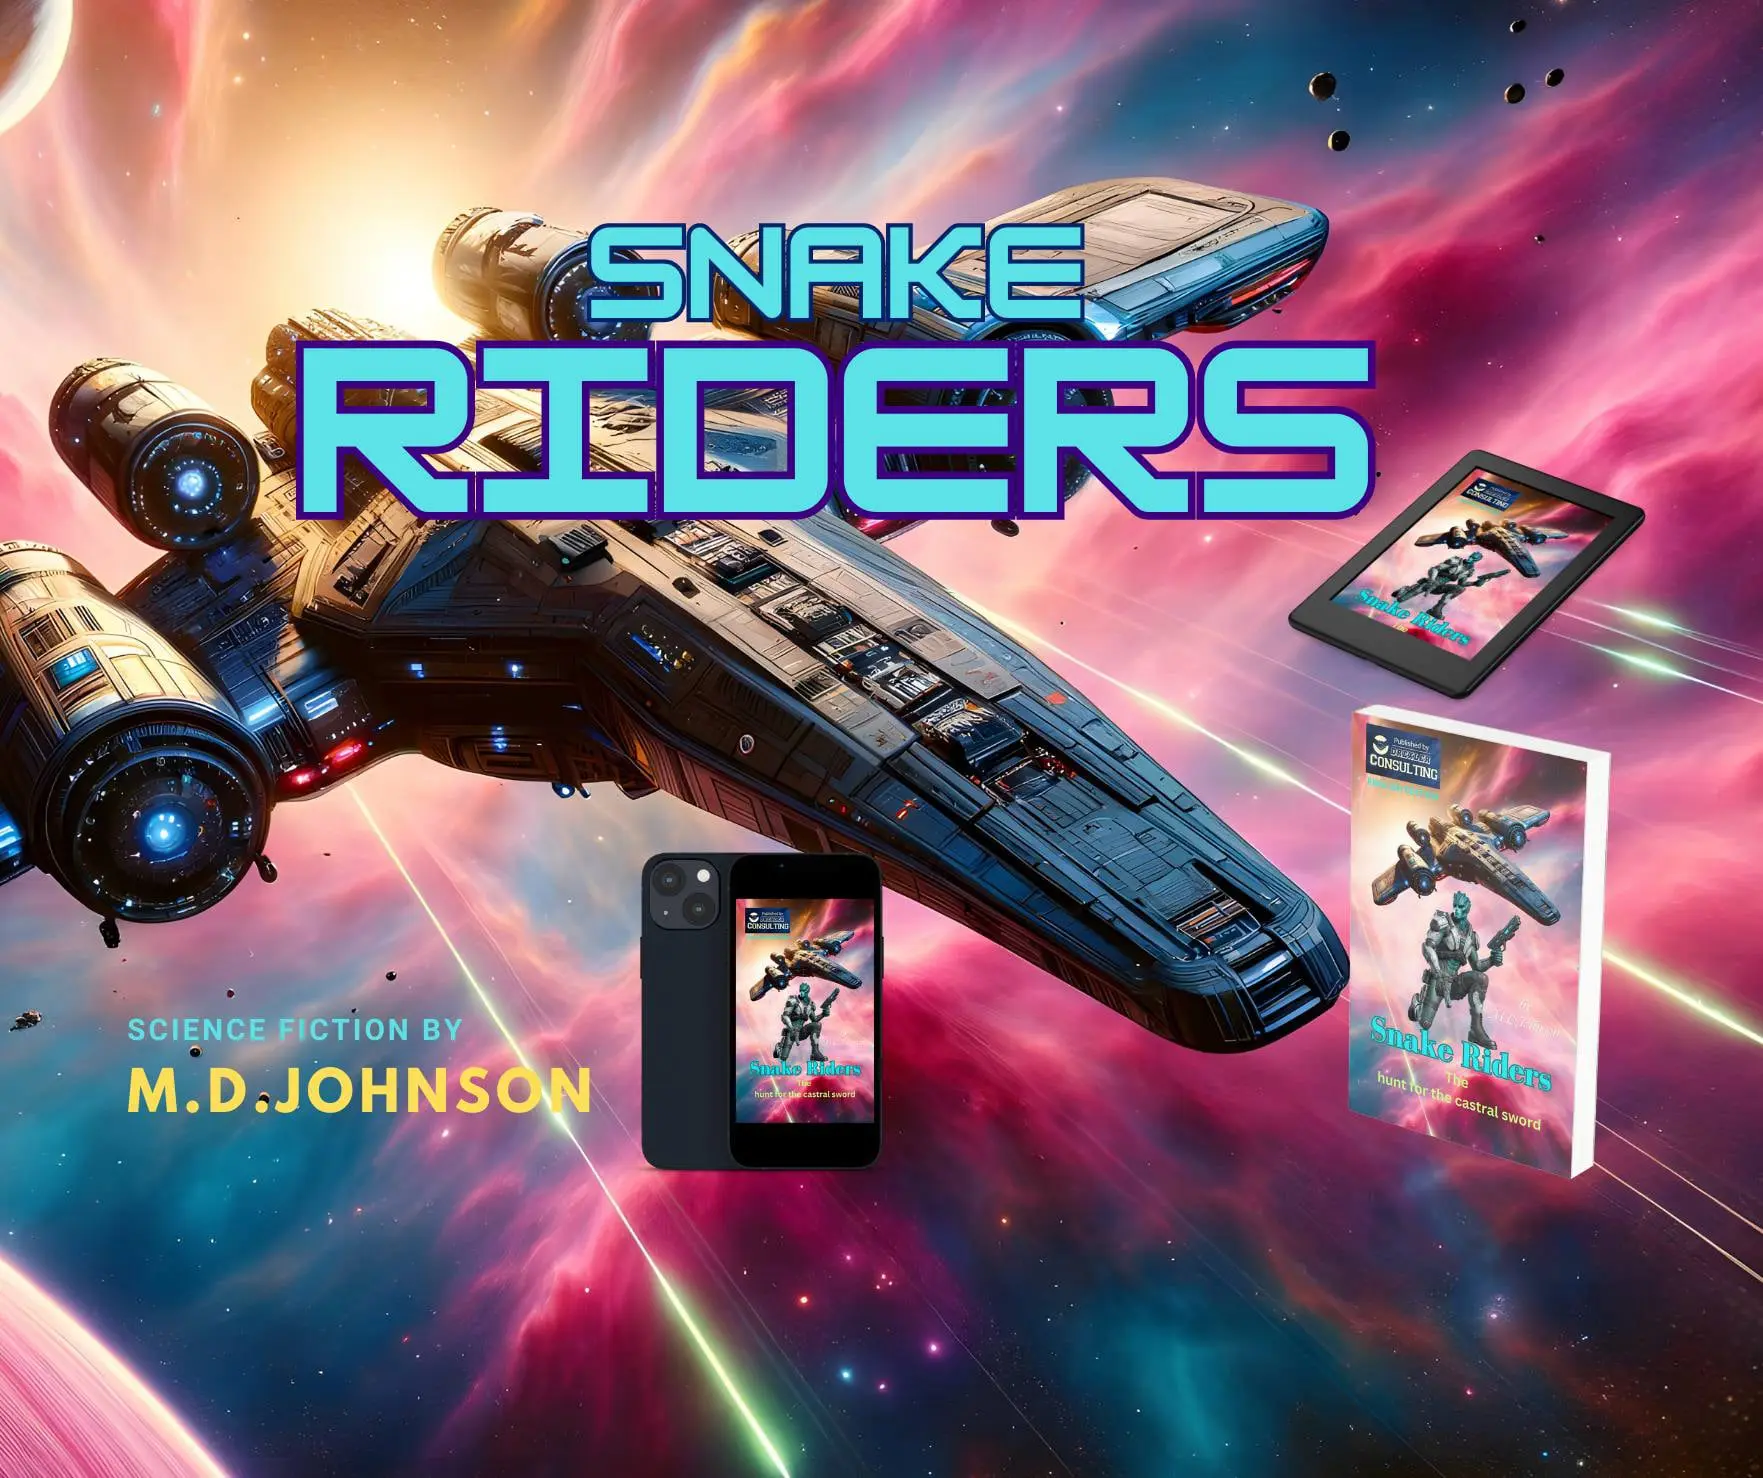 snake riders drexler consulting science fiction for child and young readers, an epic story in the galaxy